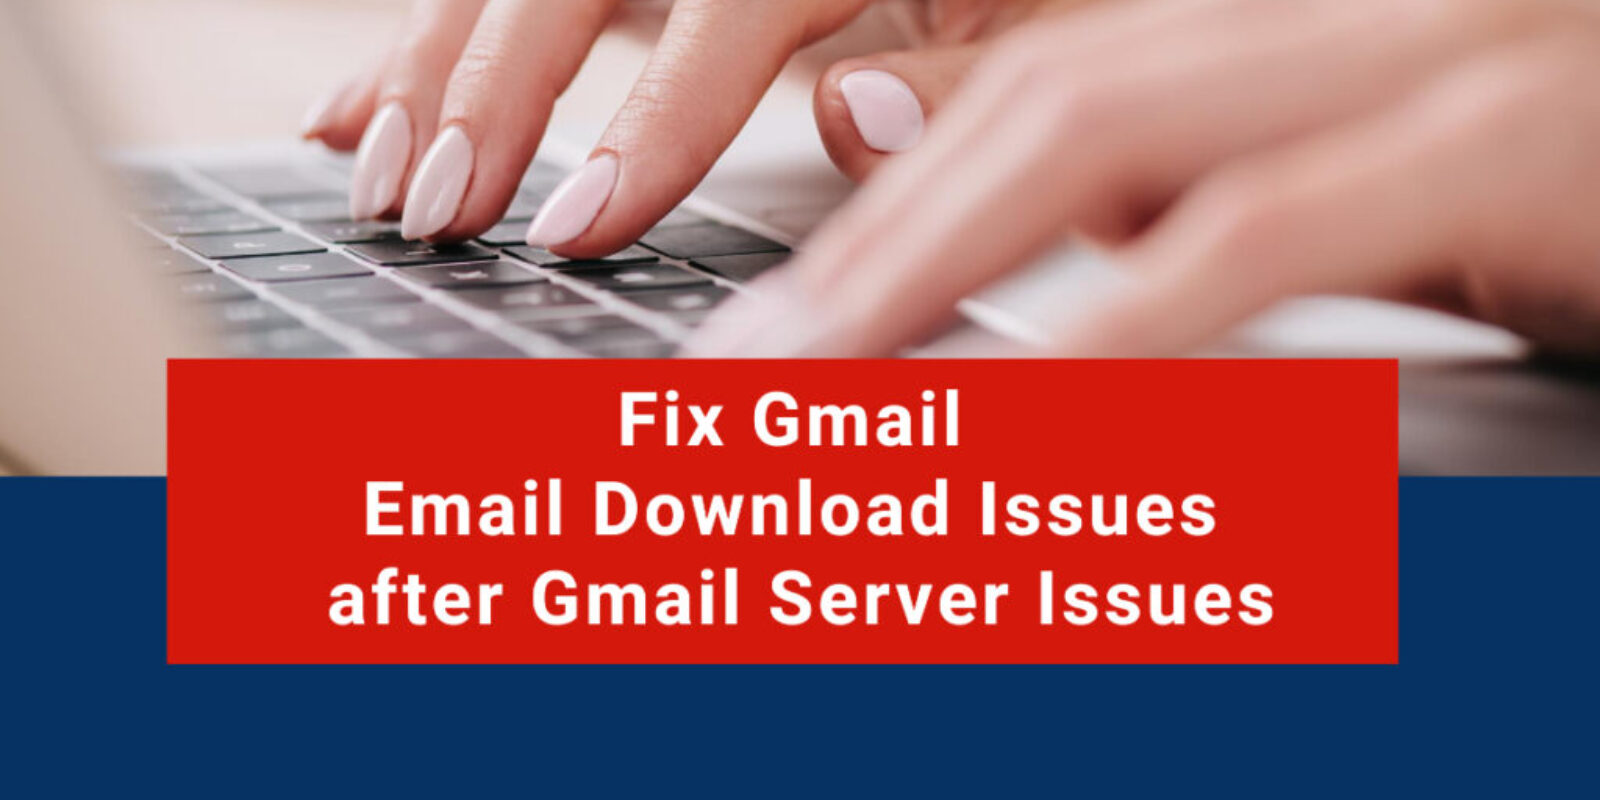 fix-gmail-email-download-issues-after-gmail-server-issues